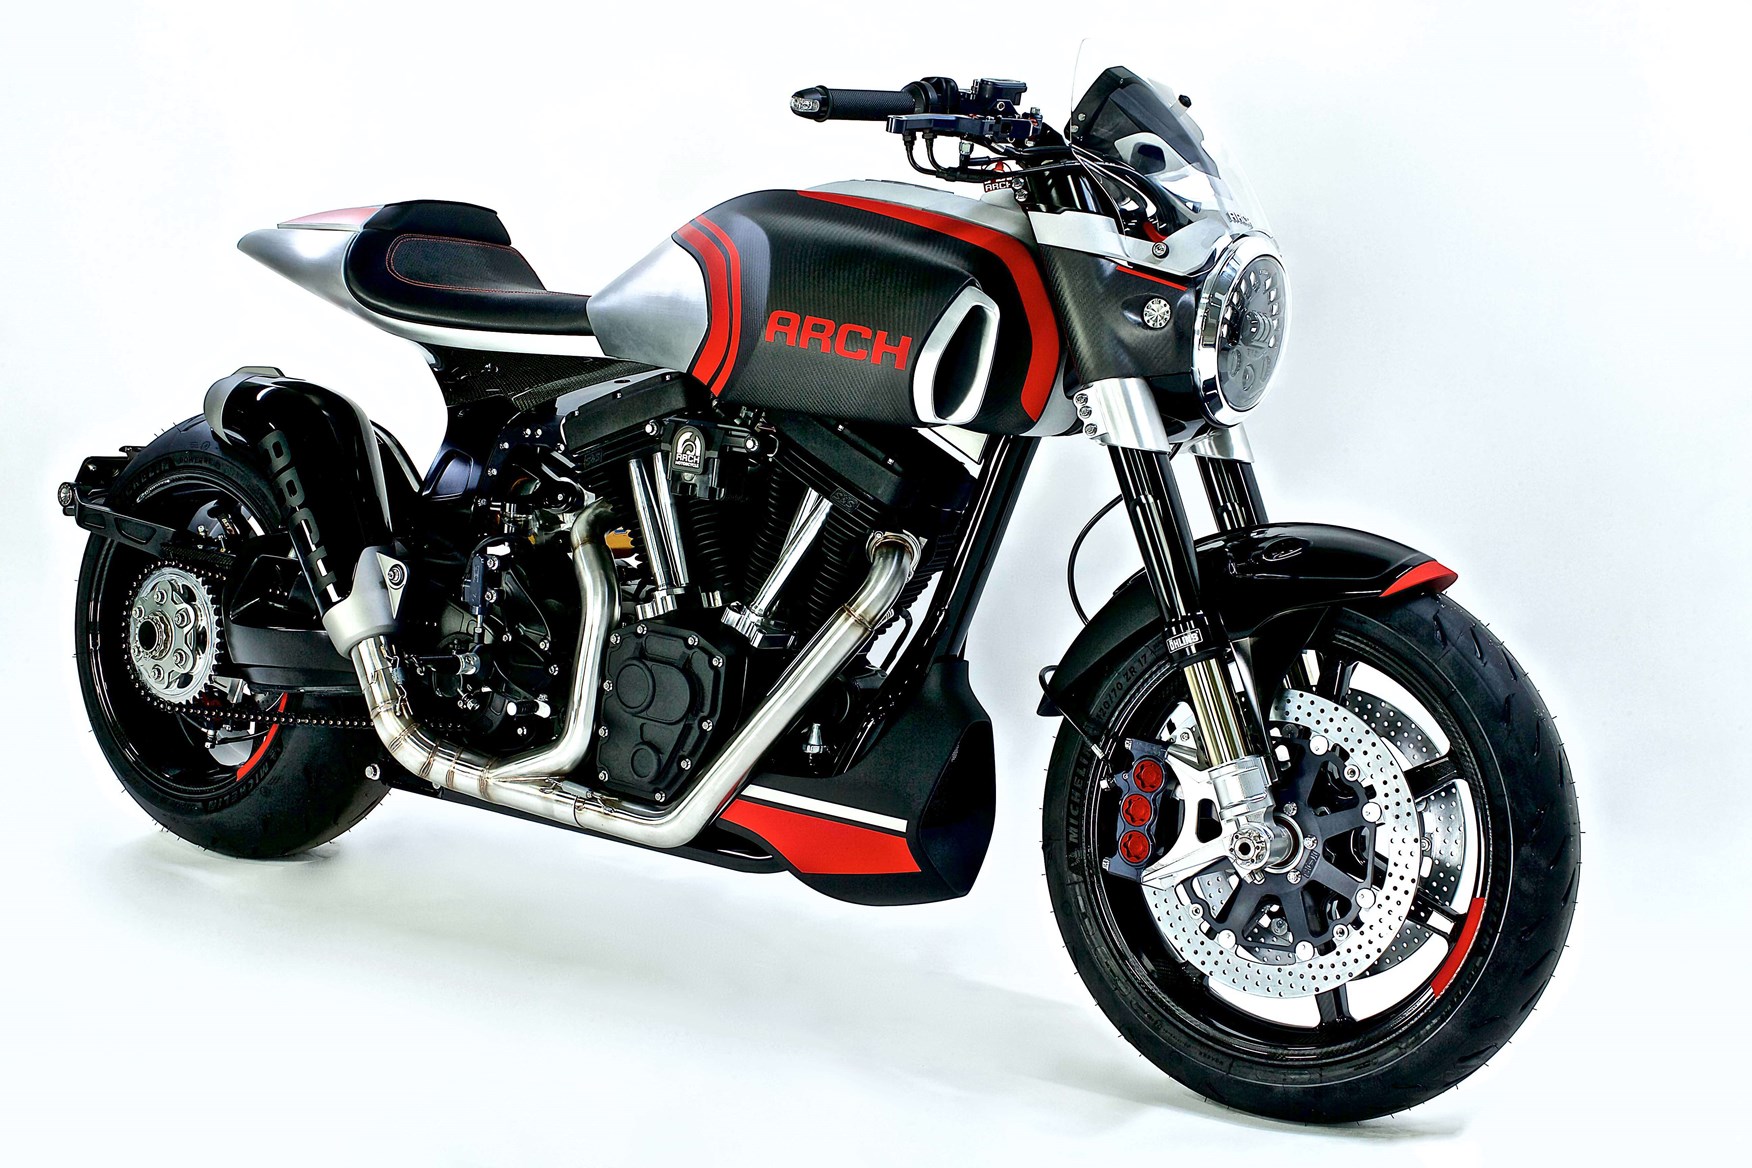 Arch Motorcycles reveal two new models